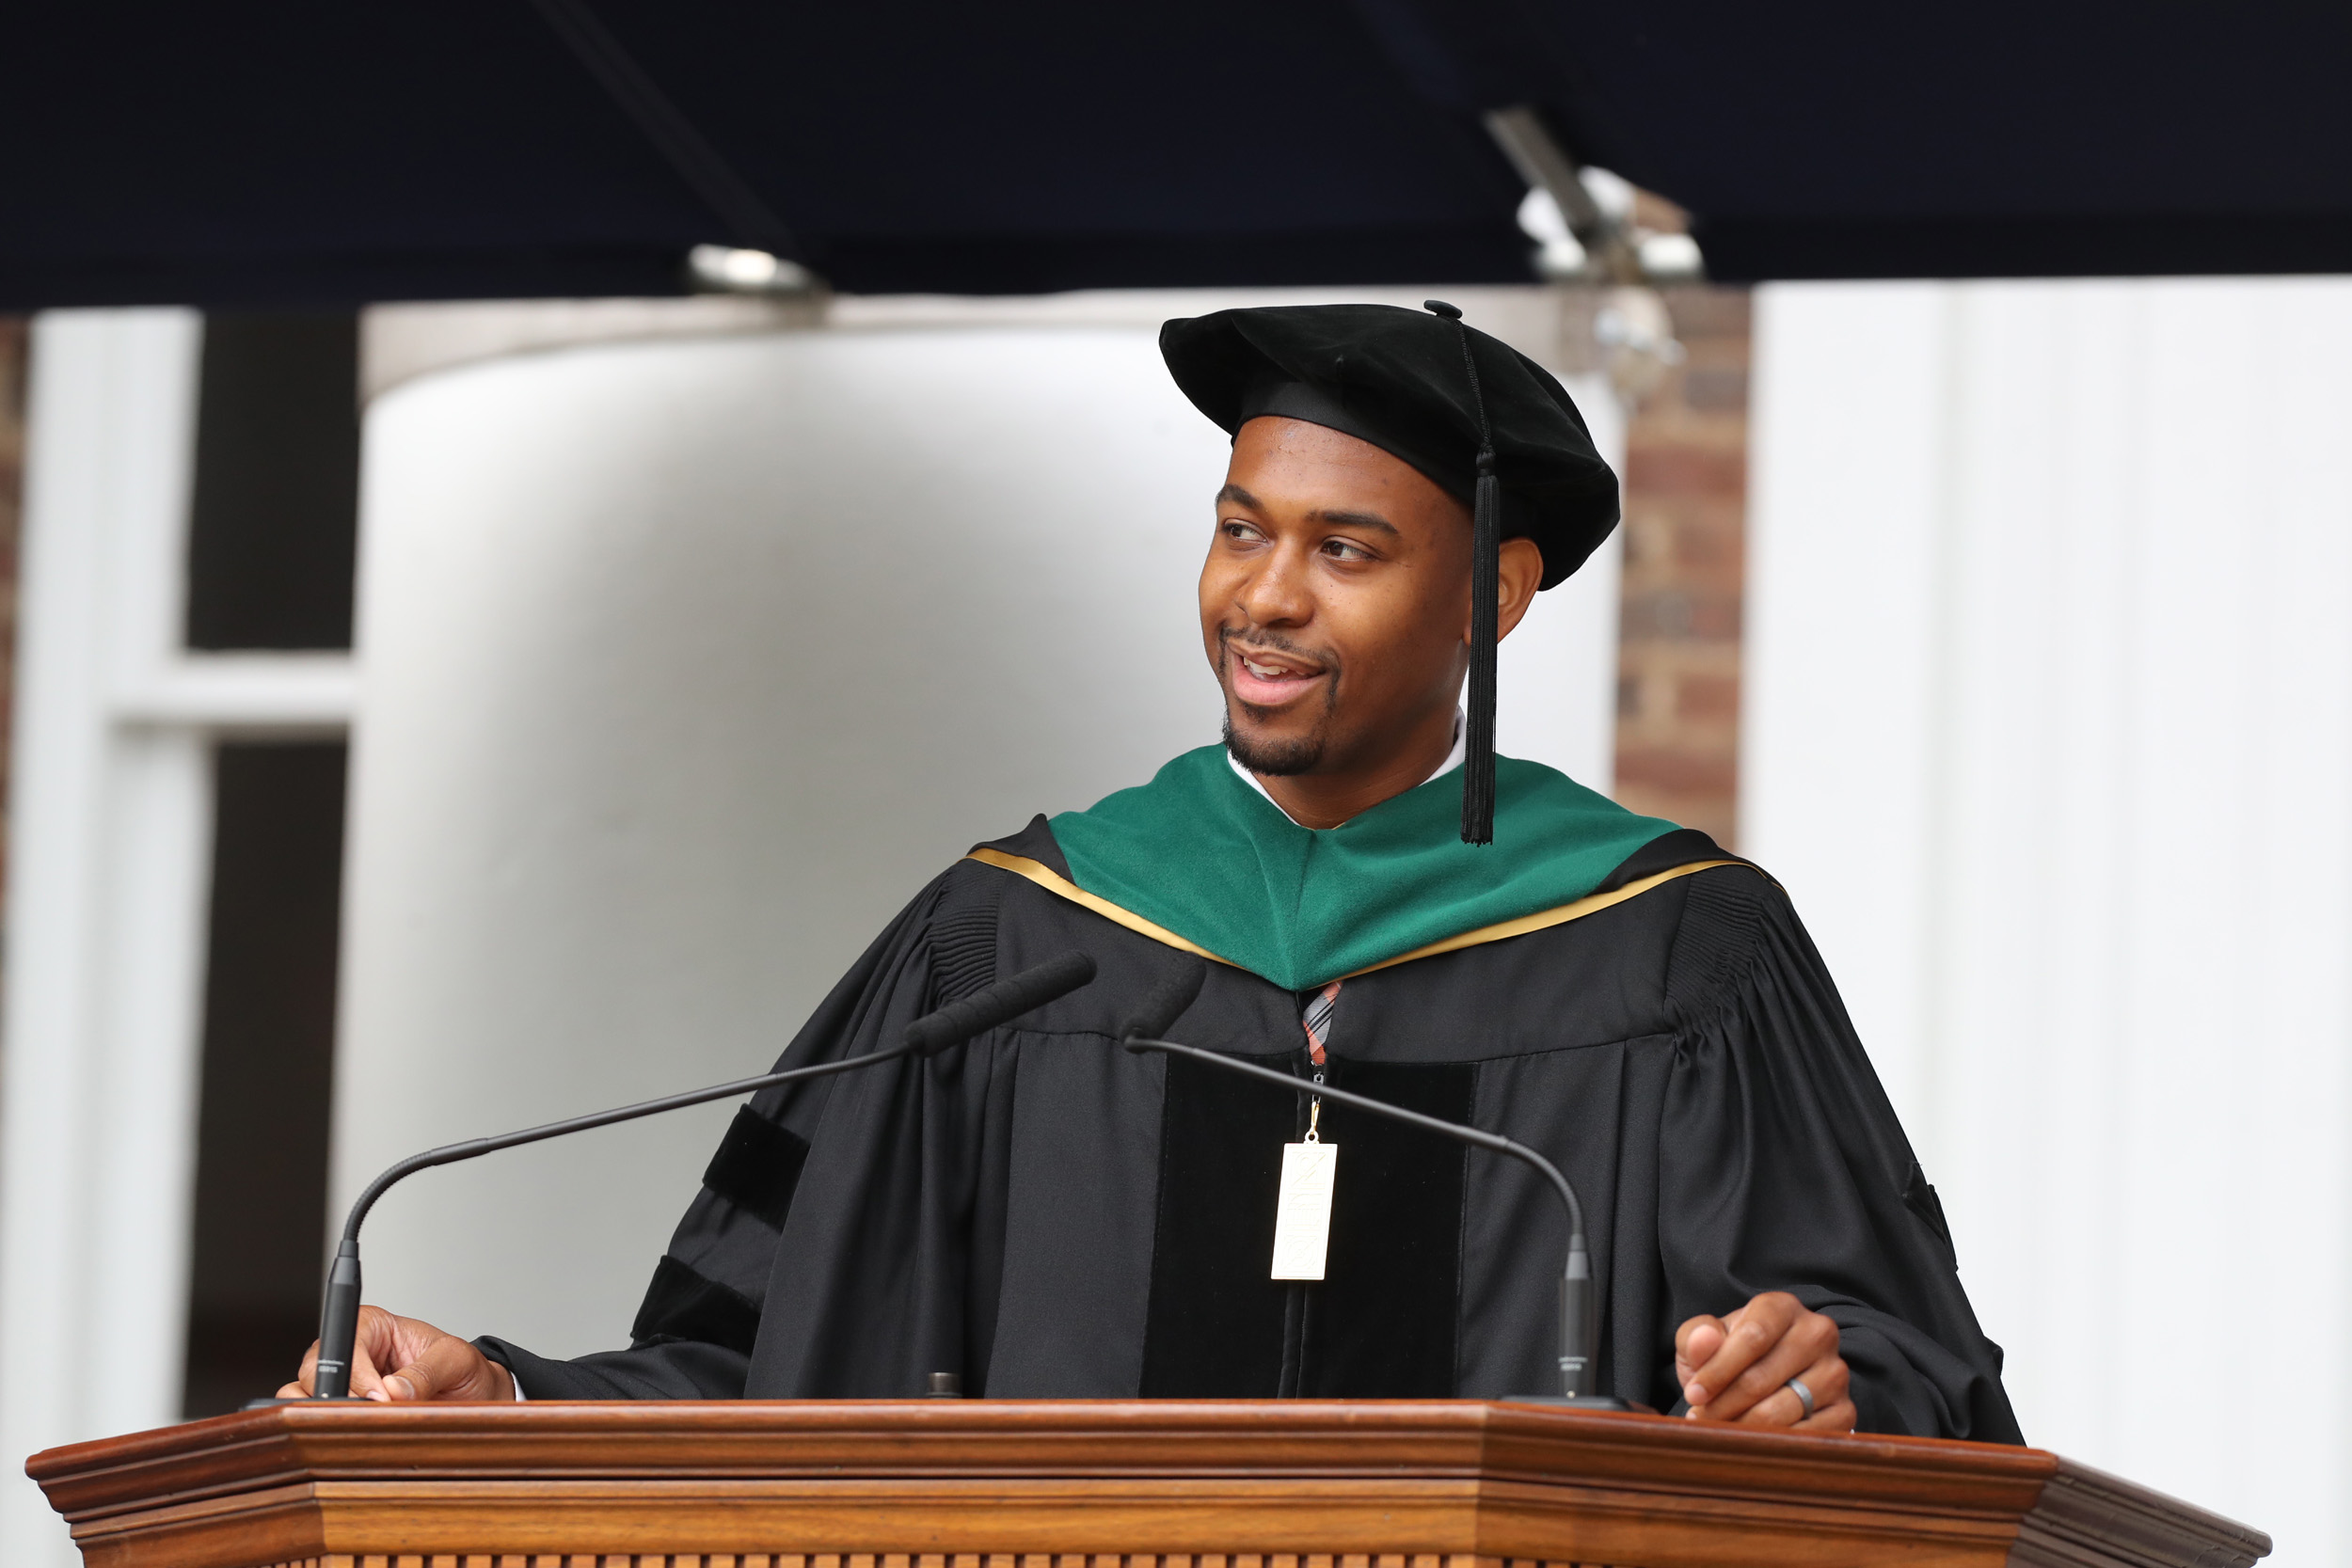 Doctorate student standing at a podium during graduation